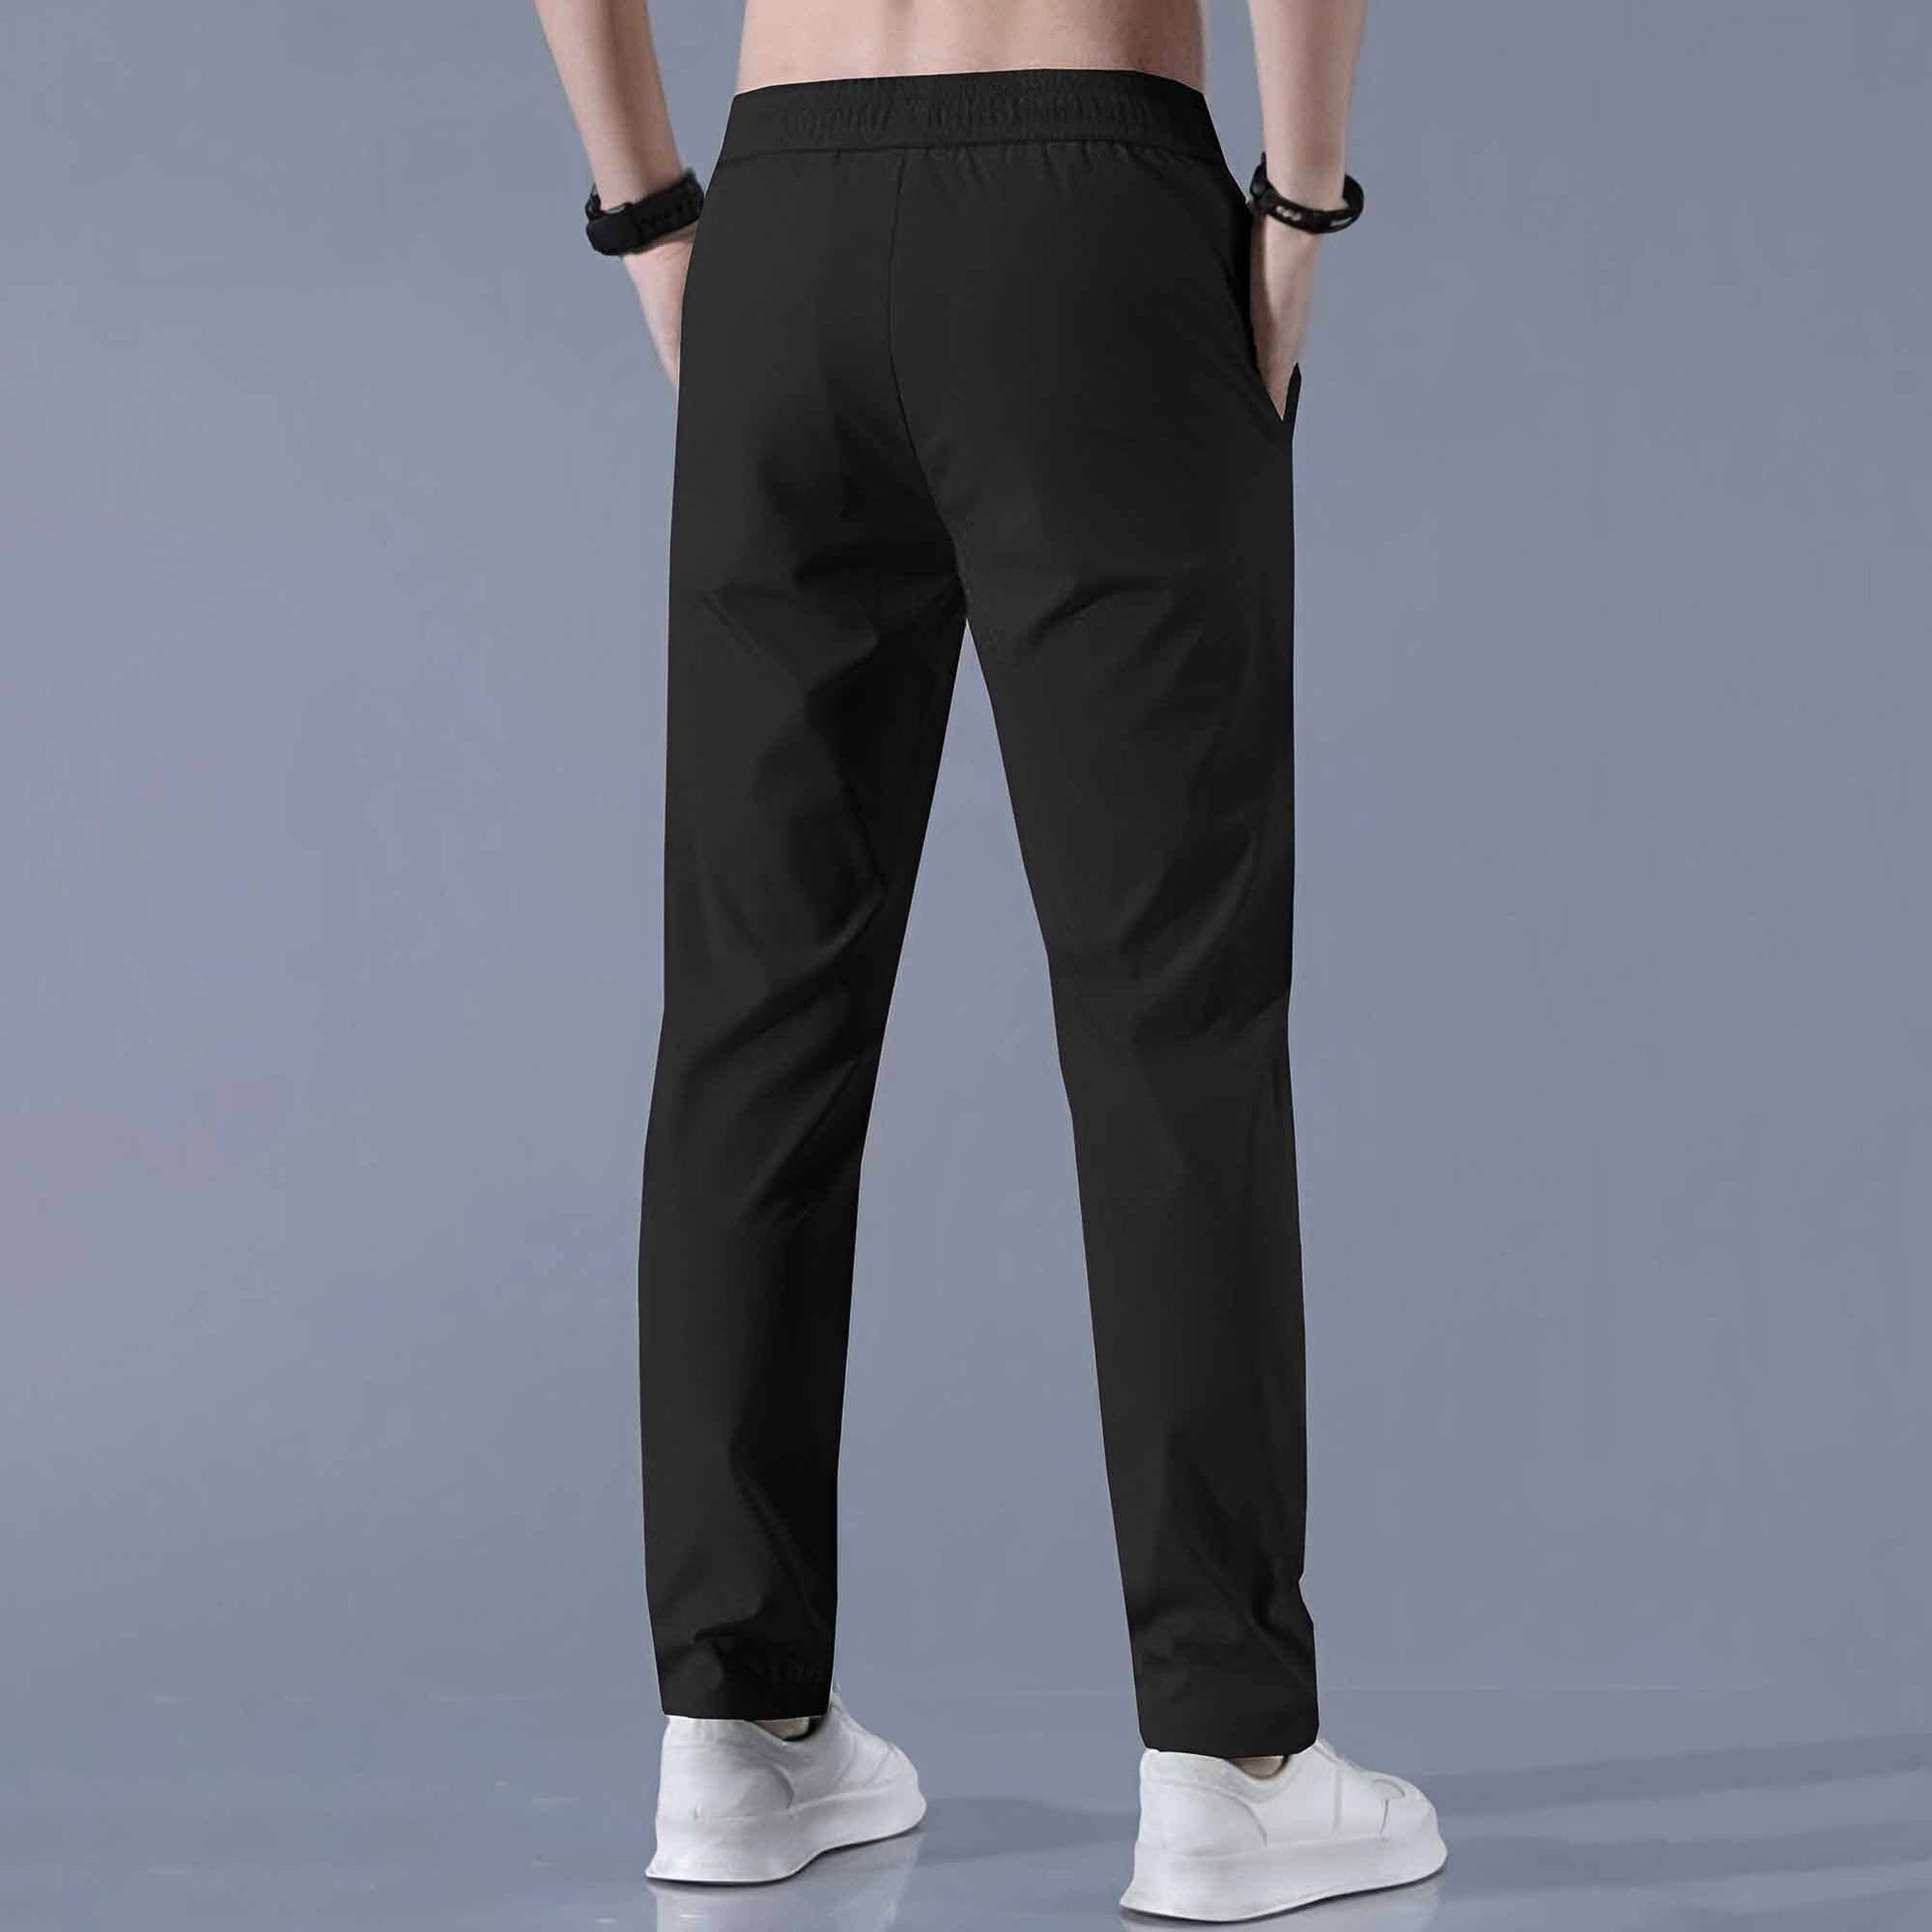 Polo Republica Men's Activewear Fast Dry Stretch Essentials Pants